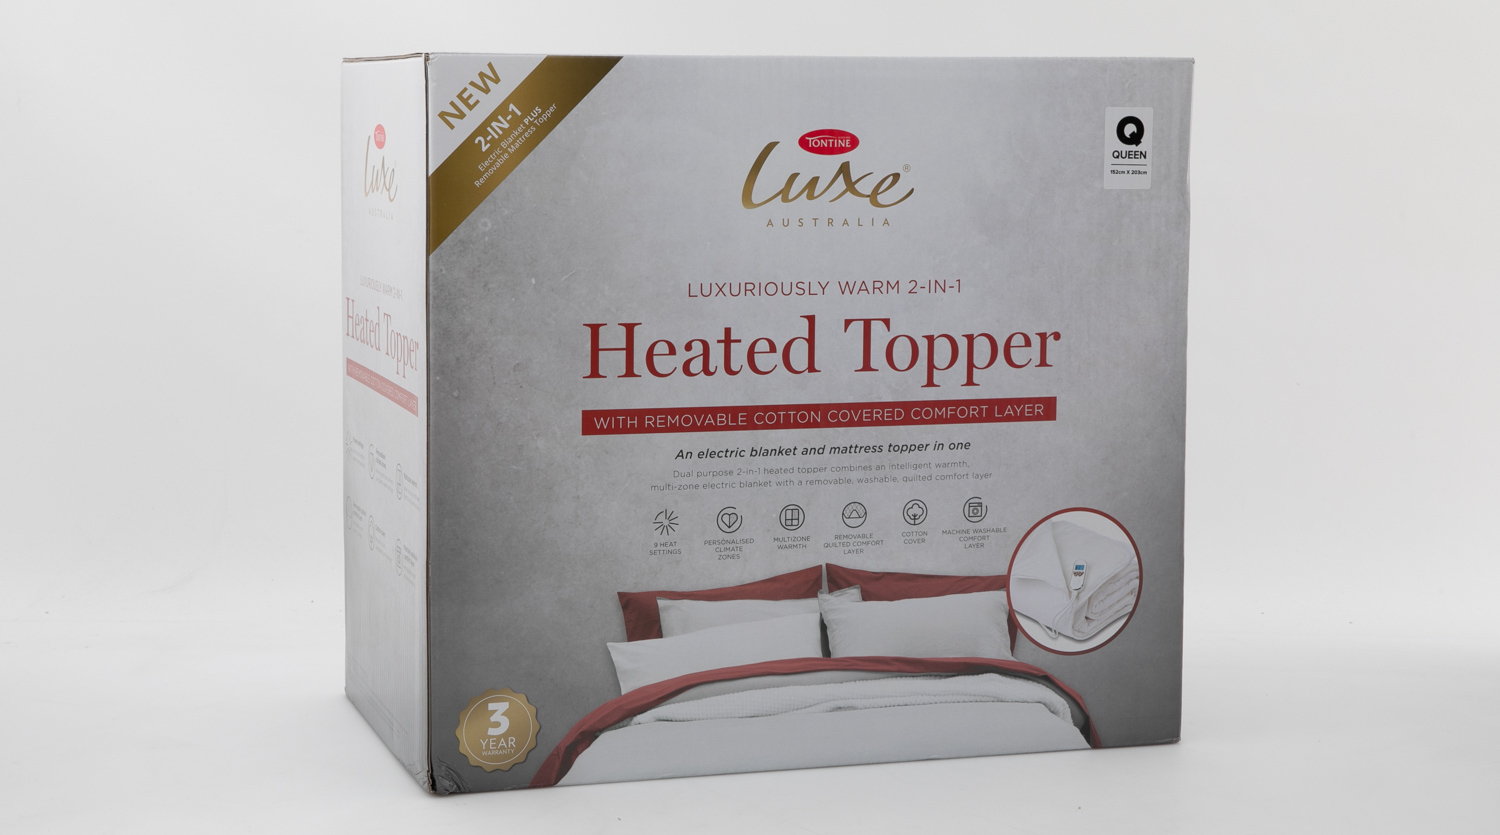 https://pdbimg.choice.com.au/tontine-luxe-luxuriously-warm-2-in-1-heated-topper-with-removable-cotton-cover-comfort-layer-tht2031qb_1.jpg